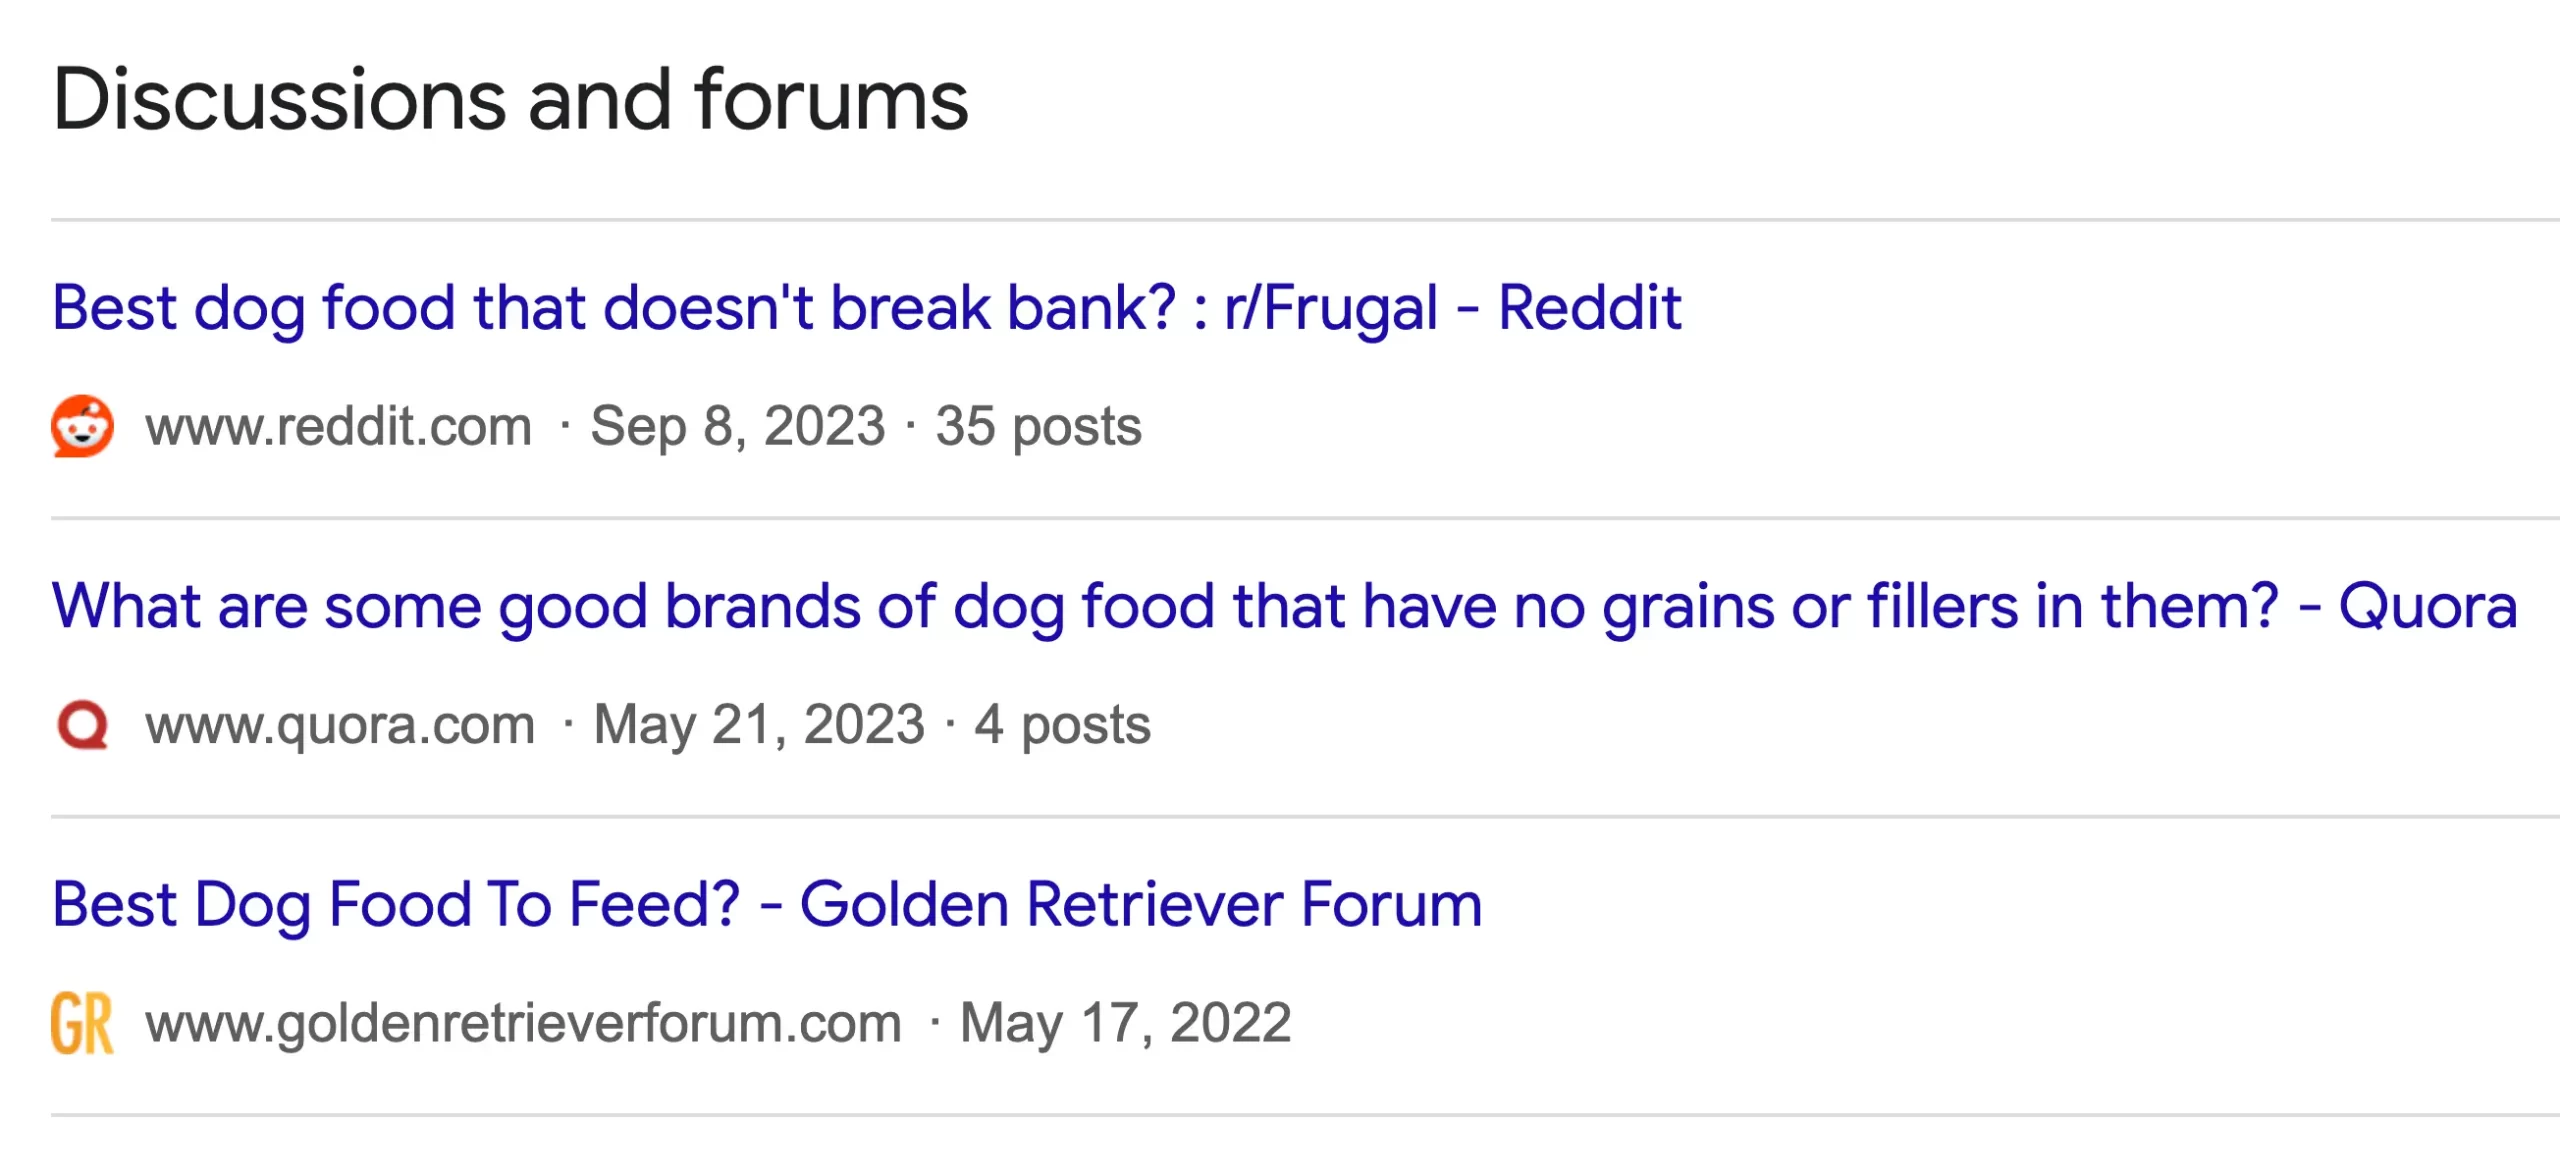 Popular Forums and Discussions